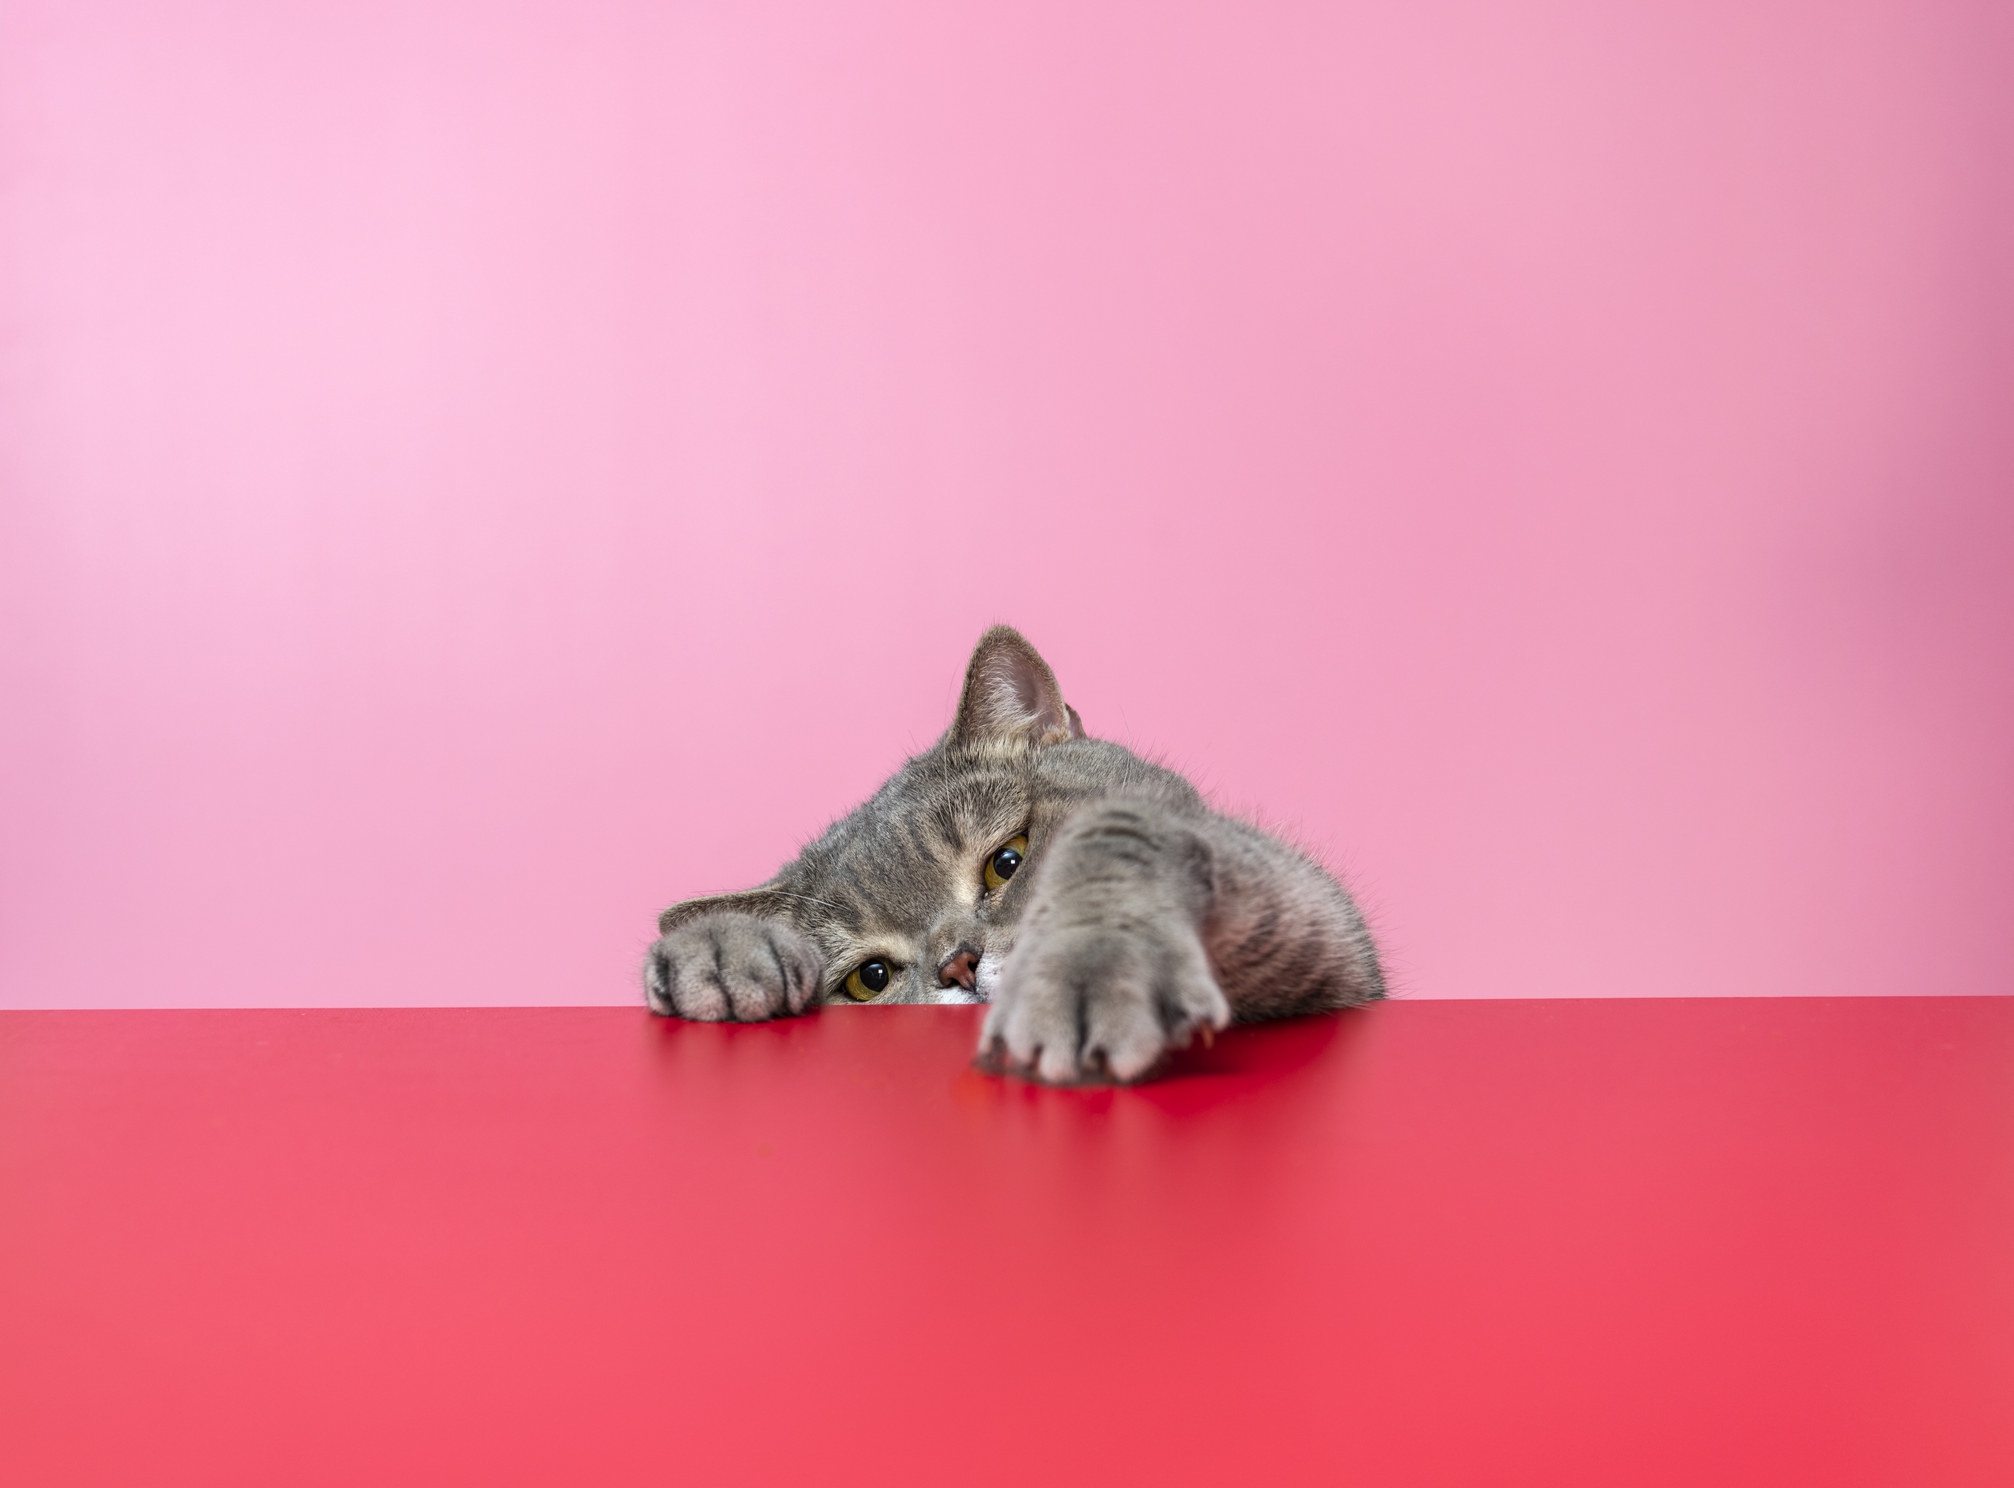 A cat against a colorful background reaches for the camera